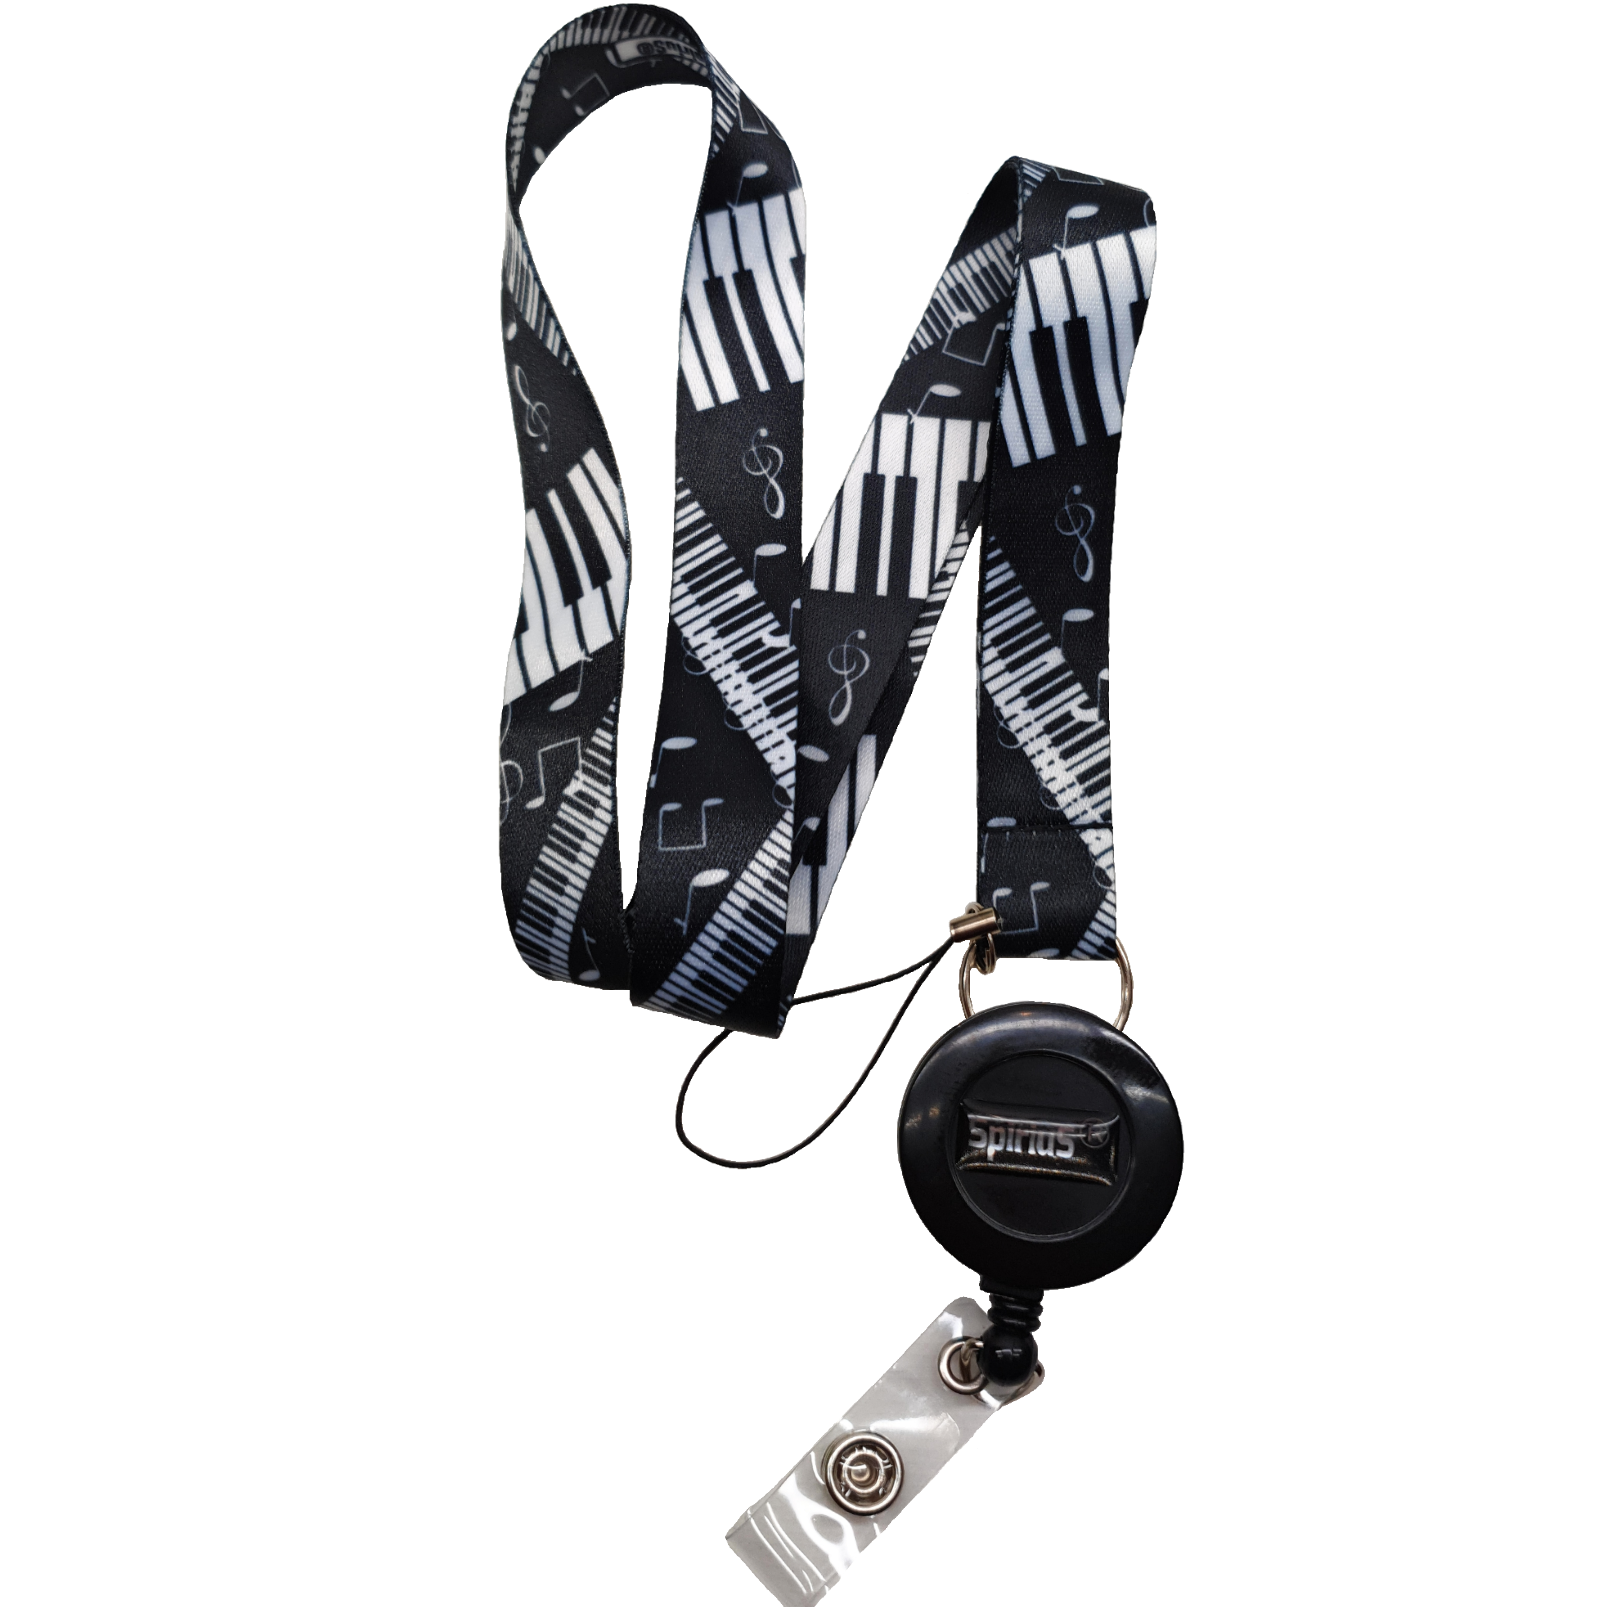 Lanyard Neck strap for ID card badge Holder with retractable reel Musi –  SpiriuS Deals